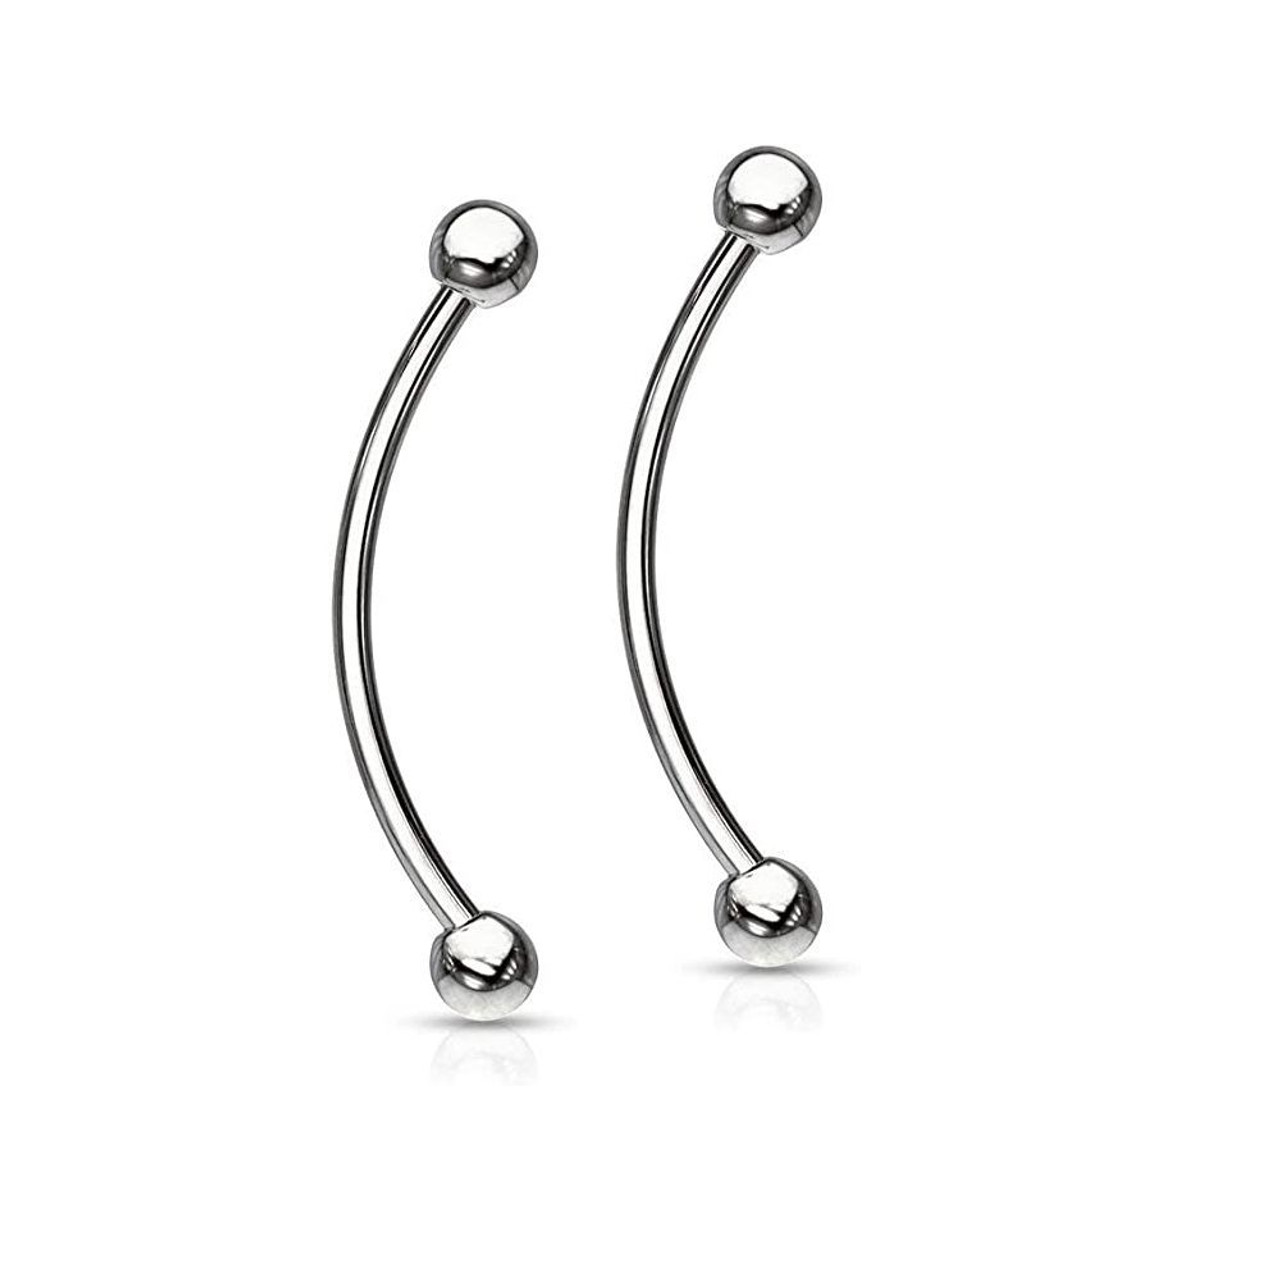 Forbidden Body Jewelry 16g 12-16mm Surgical Steel Curved Barbell with Solid Ends for Snake Eyes Tongue Piercing 